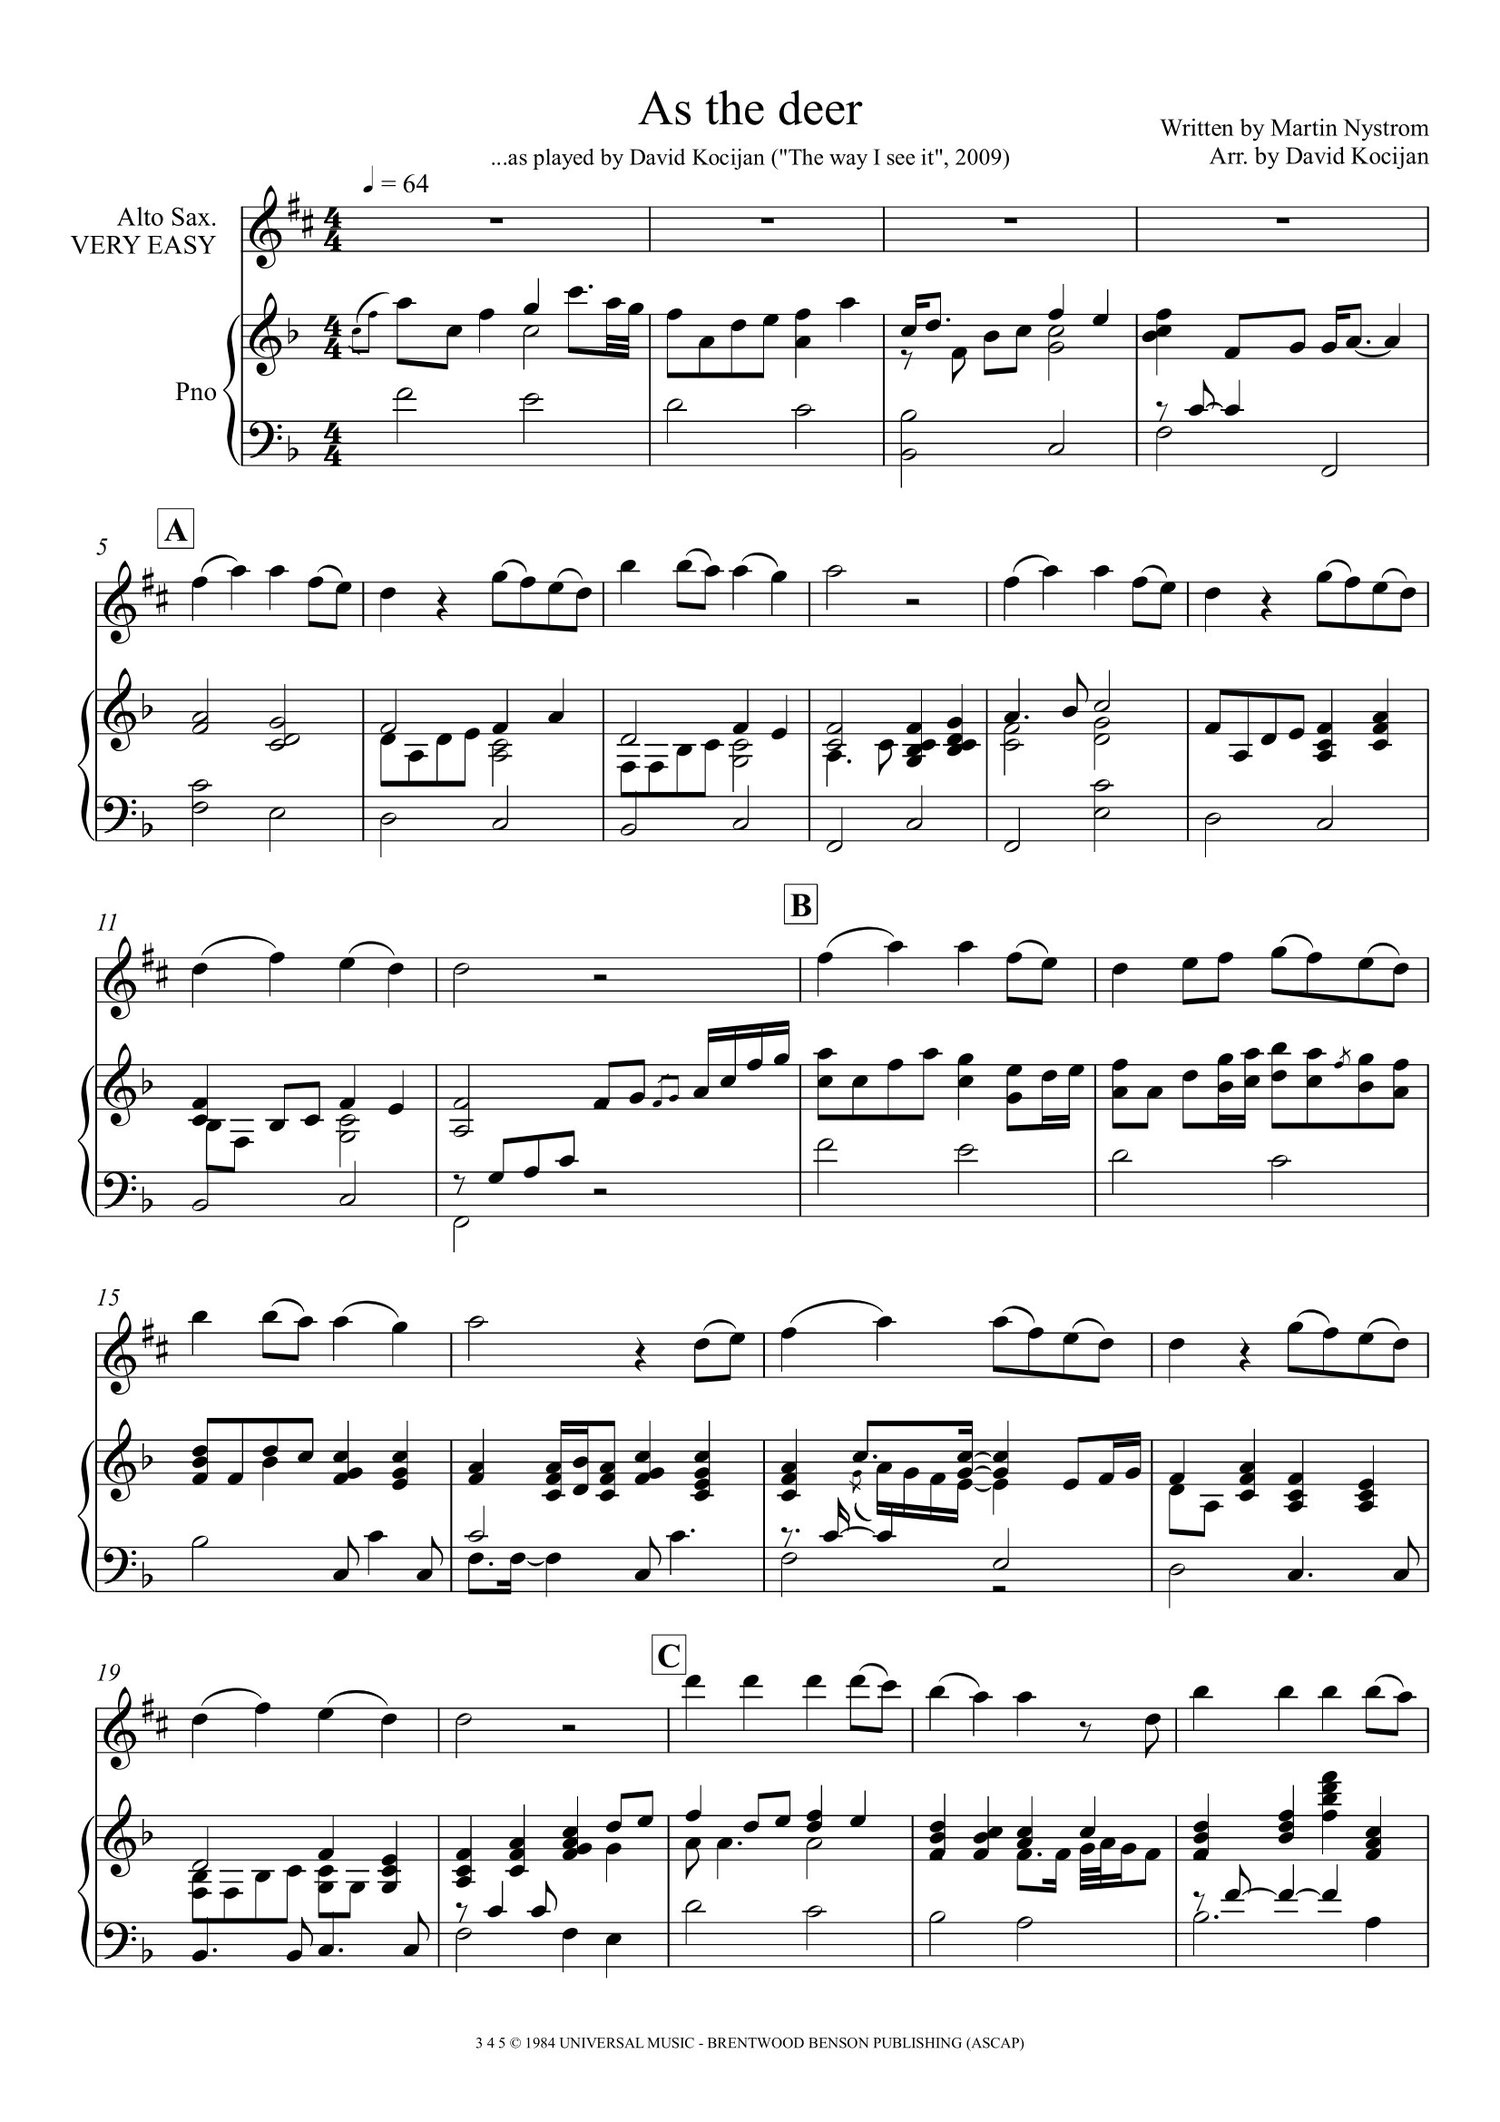 As the deer - VERY EASY (alto sax & piano) SHEET MUSIC - Payhip